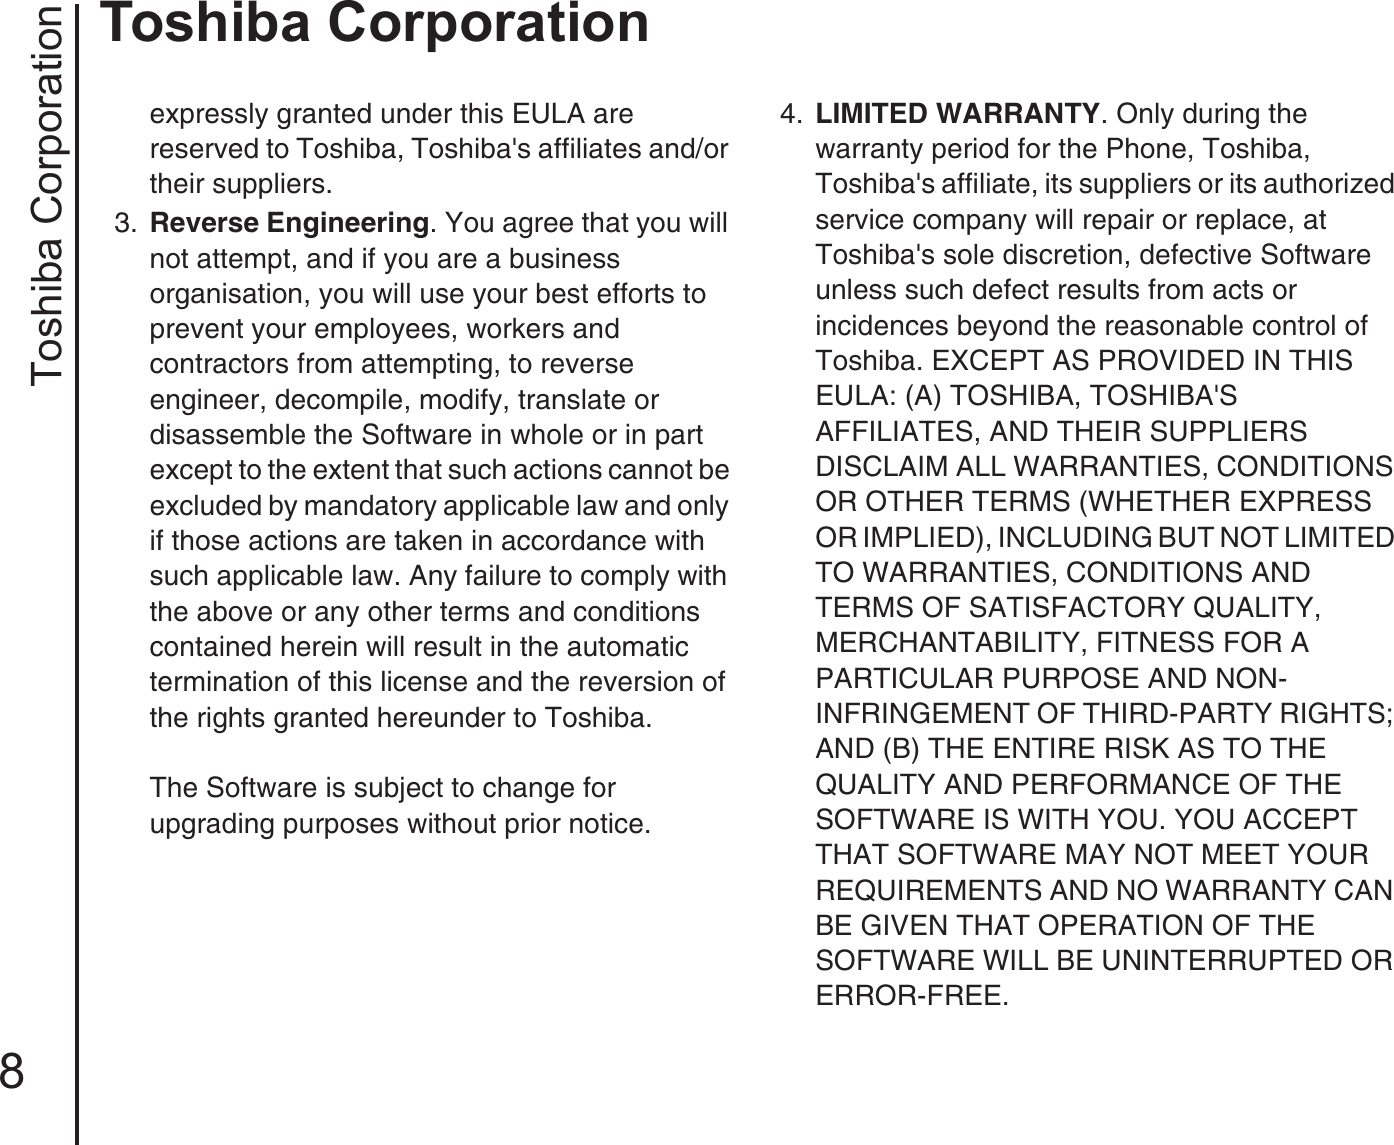 Toshiba Corporation8Toshiba Corporationexpressly granted under this EULA are reserved to Toshiba, Toshiba&apos;s affiliates and/or their suppliers.3.  Reverse Engineering. You agree that you will not attempt, and if you are a business organisation, you will use your best efforts to prevent your employees, workers and contractors from attempting, to reverse engineer, decompile, modify, translate or disassemble the Software in whole or in part except to the extent that such actions cannot be excluded by mandatory applicable law and only if those actions are taken in accordance with such applicable law. Any failure to comply with the above or any other terms and conditions contained herein will result in the automatic termination of this license and the reversion of the rights granted hereunder to Toshiba.The Software is subject to change for upgrading purposes without prior notice.4.  LIMITED WARRANTY. Only during the warranty period for the Phone, Toshiba, Toshiba&apos;s affiliate, its suppliers or its authorized service company will repair or replace, at Toshiba&apos;s sole discretion, defective Software unless such defect results from acts or incidences beyond the reasonable control of Toshiba. EXCEPT AS PROVIDED IN THIS EULA: (A) TOSHIBA, TOSHIBA&apos;S AFFILIATES, AND THEIR SUPPLIERS DISCLAIM ALL WARRANTIES, CONDITIONS OR OTHER TERMS (WHETHER EXPRESS OR IMPLIED), INCLUDING BUT NOT LIMITED TO WARRANTIES, CONDITIONS AND TERMS OF SATISFACTORY QUALITY, MERCHANTABILITY, FITNESS FOR A PARTICULAR PURPOSE AND NON-INFRINGEMENT OF THIRD-PARTY RIGHTS; AND (B) THE ENTIRE RISK AS TO THE QUALITY AND PERFORMANCE OF THE SOFTWARE IS WITH YOU. YOU ACCEPT THAT SOFTWARE MAY NOT MEET YOUR REQUIREMENTS AND NO WARRANTY CAN BE GIVEN THAT OPERATION OF THE SOFTWARE WILL BE UNINTERRUPTED OR ERROR-FREE.